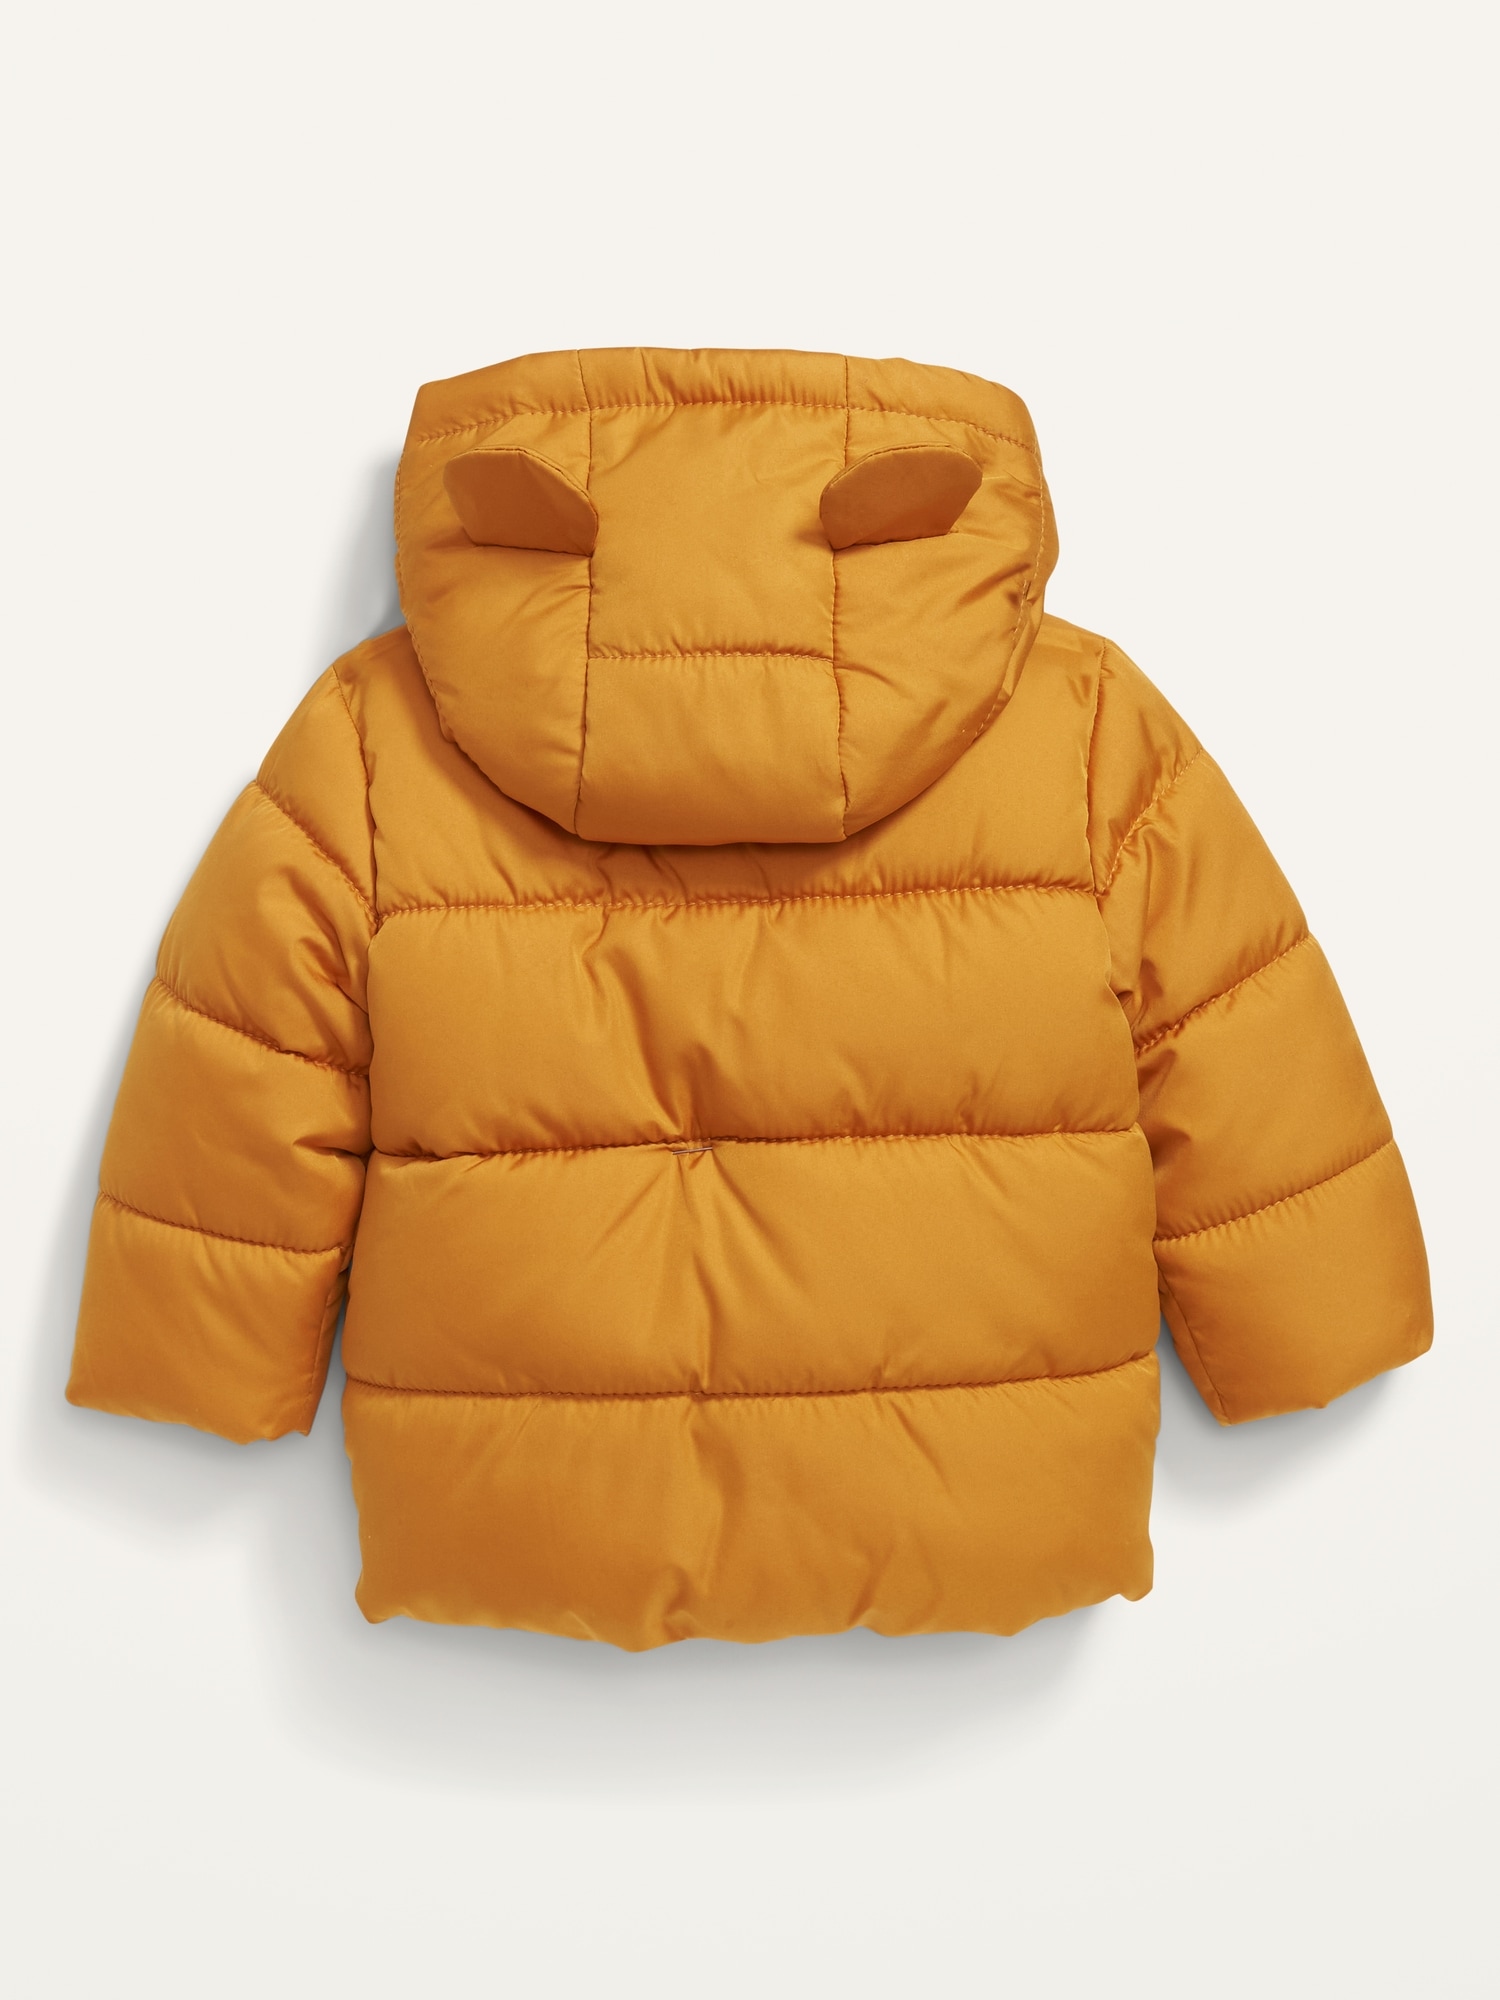 Unisex Water-Resistant Frost-Free Hooded Puffer Jacket for Baby | Old Navy